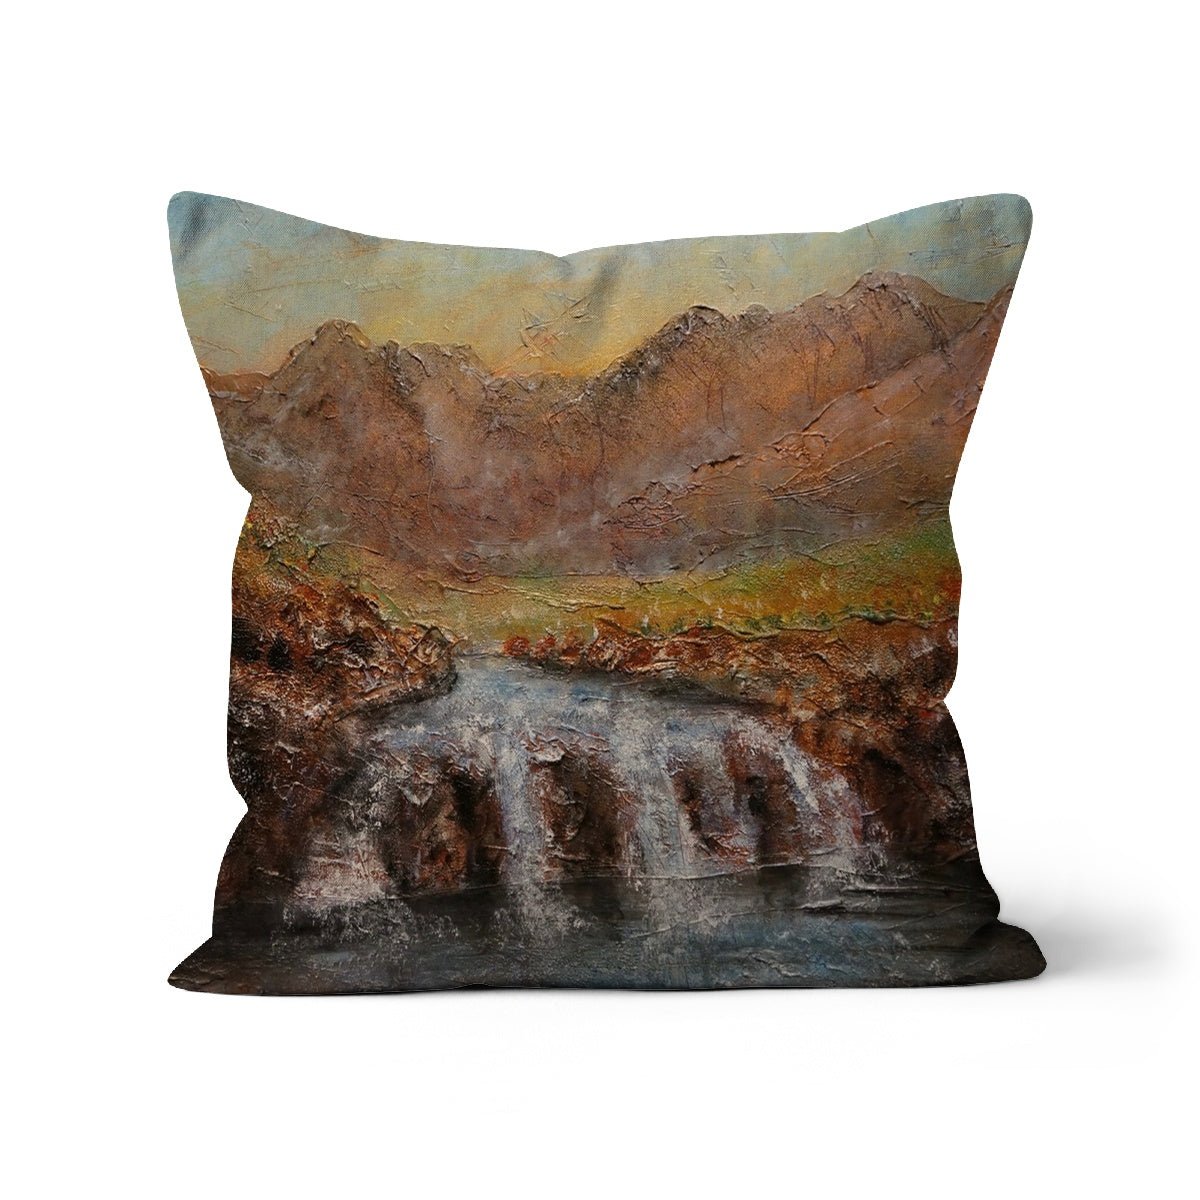 Fairy Pools Dawn Skye Art Gifts Cushion-Cushions-Skye Art Gallery-Linen-22"x22"-Paintings, Prints, Homeware, Art Gifts From Scotland By Scottish Artist Kevin Hunter